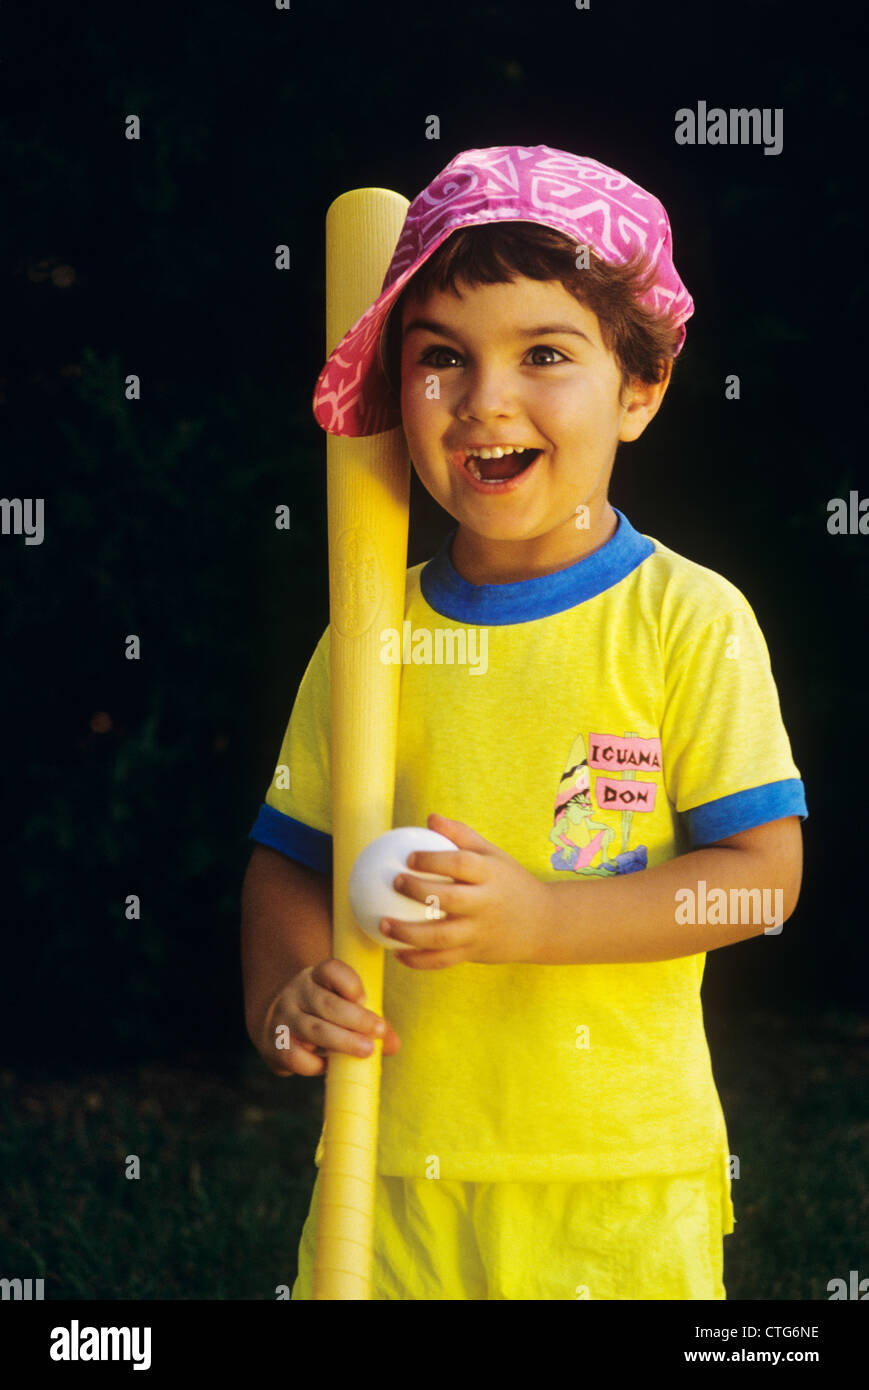 BOY IN PINK HAT HOLDING BALL AND PLASTIC BAT Stock Photo